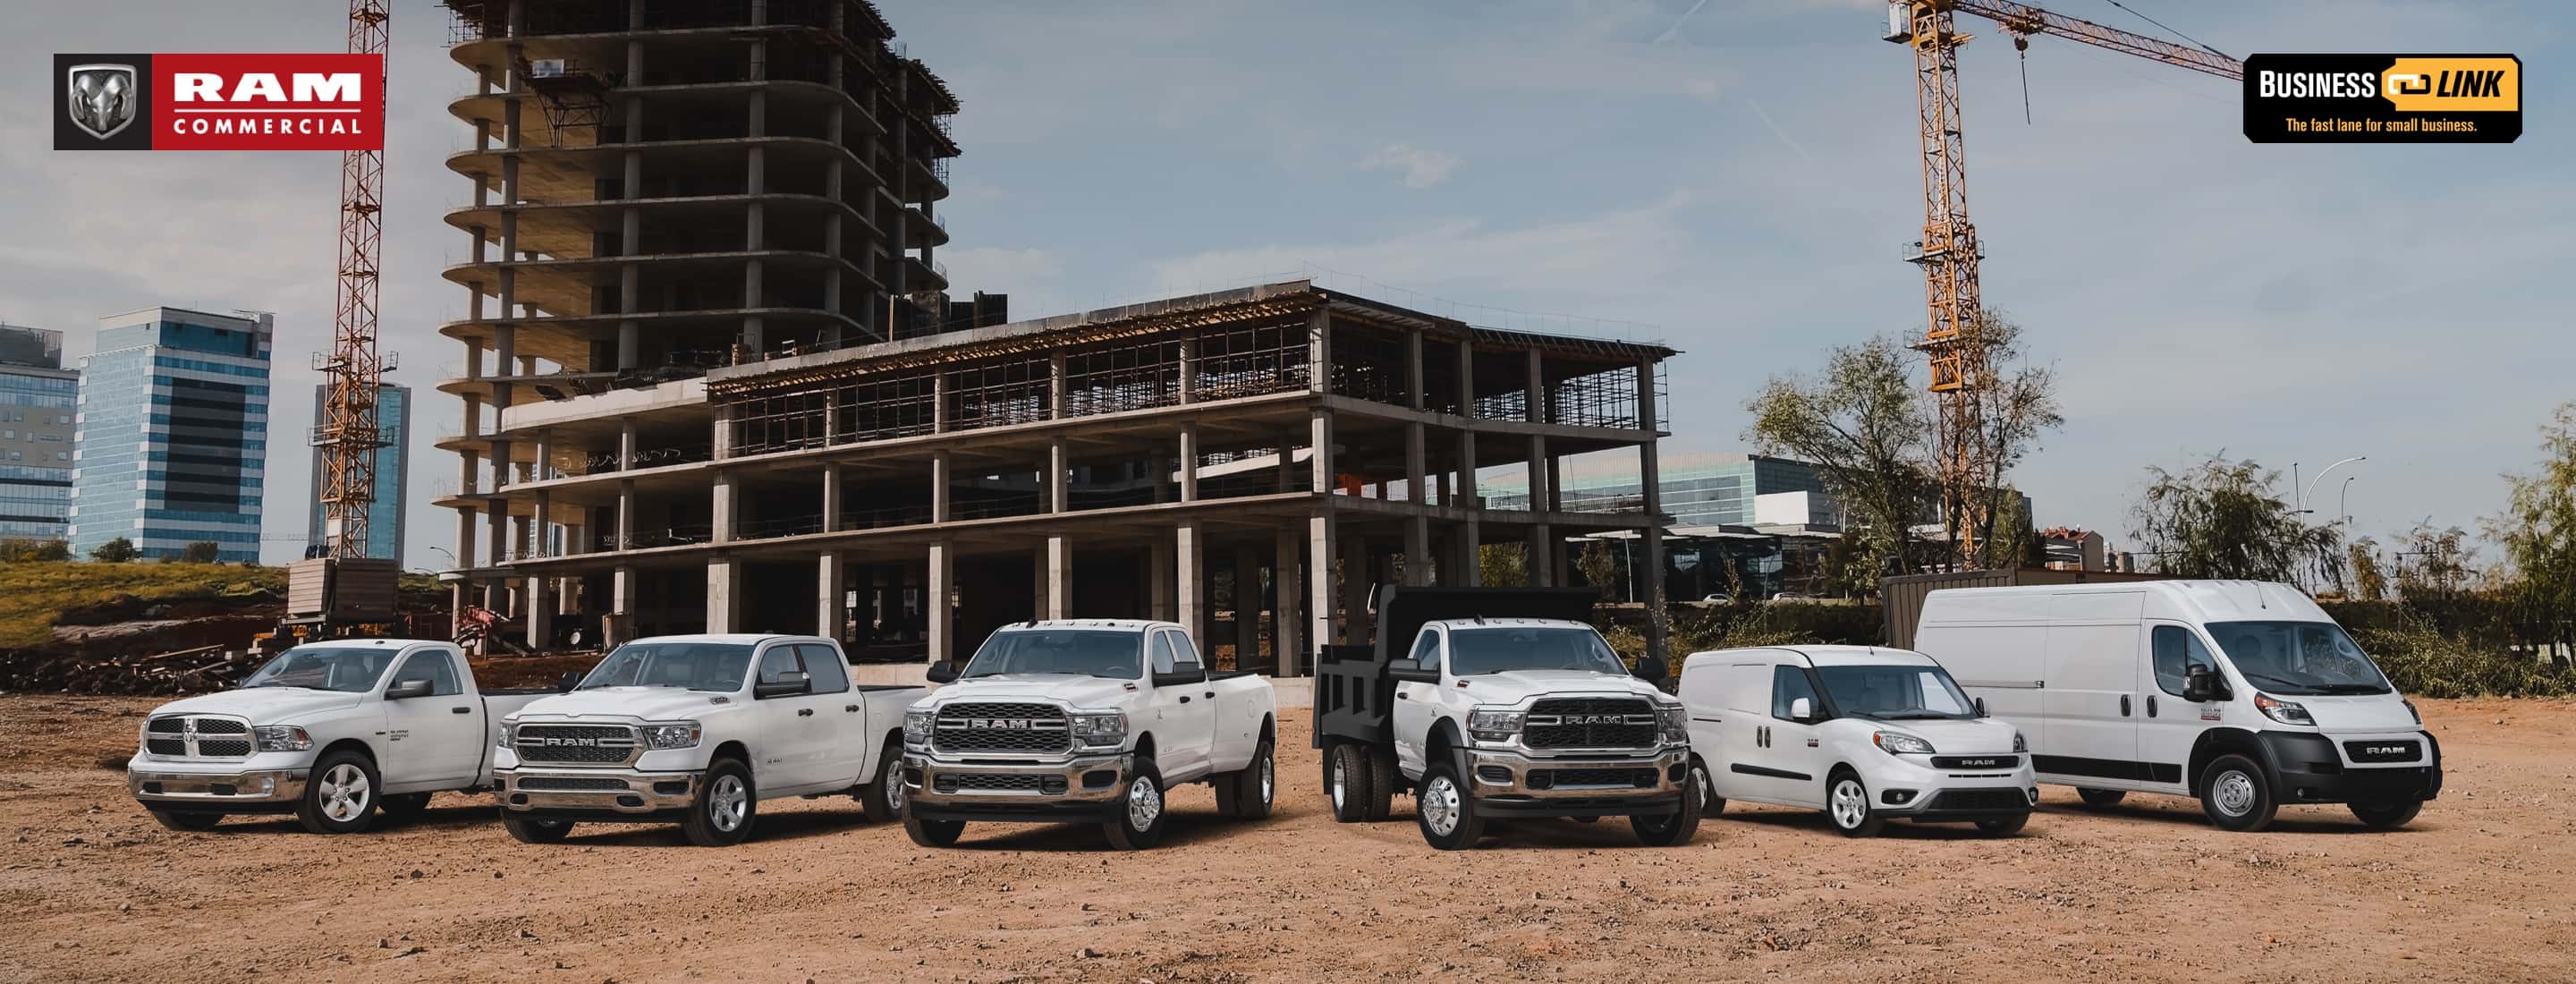 The Ram Commercial logo and BusinessLink logo. Fast lane for small business. The 2021 Ram lineup parked at a commercial construction site. From left to right: four Tradesman models--a Ram 1500 Classic, Ram 1500, Ram 3500 and Ram 5500, followed by a Ram ProMaster City SLT Cargo Van and a Ram ProMaster 2500 Cargo Van.